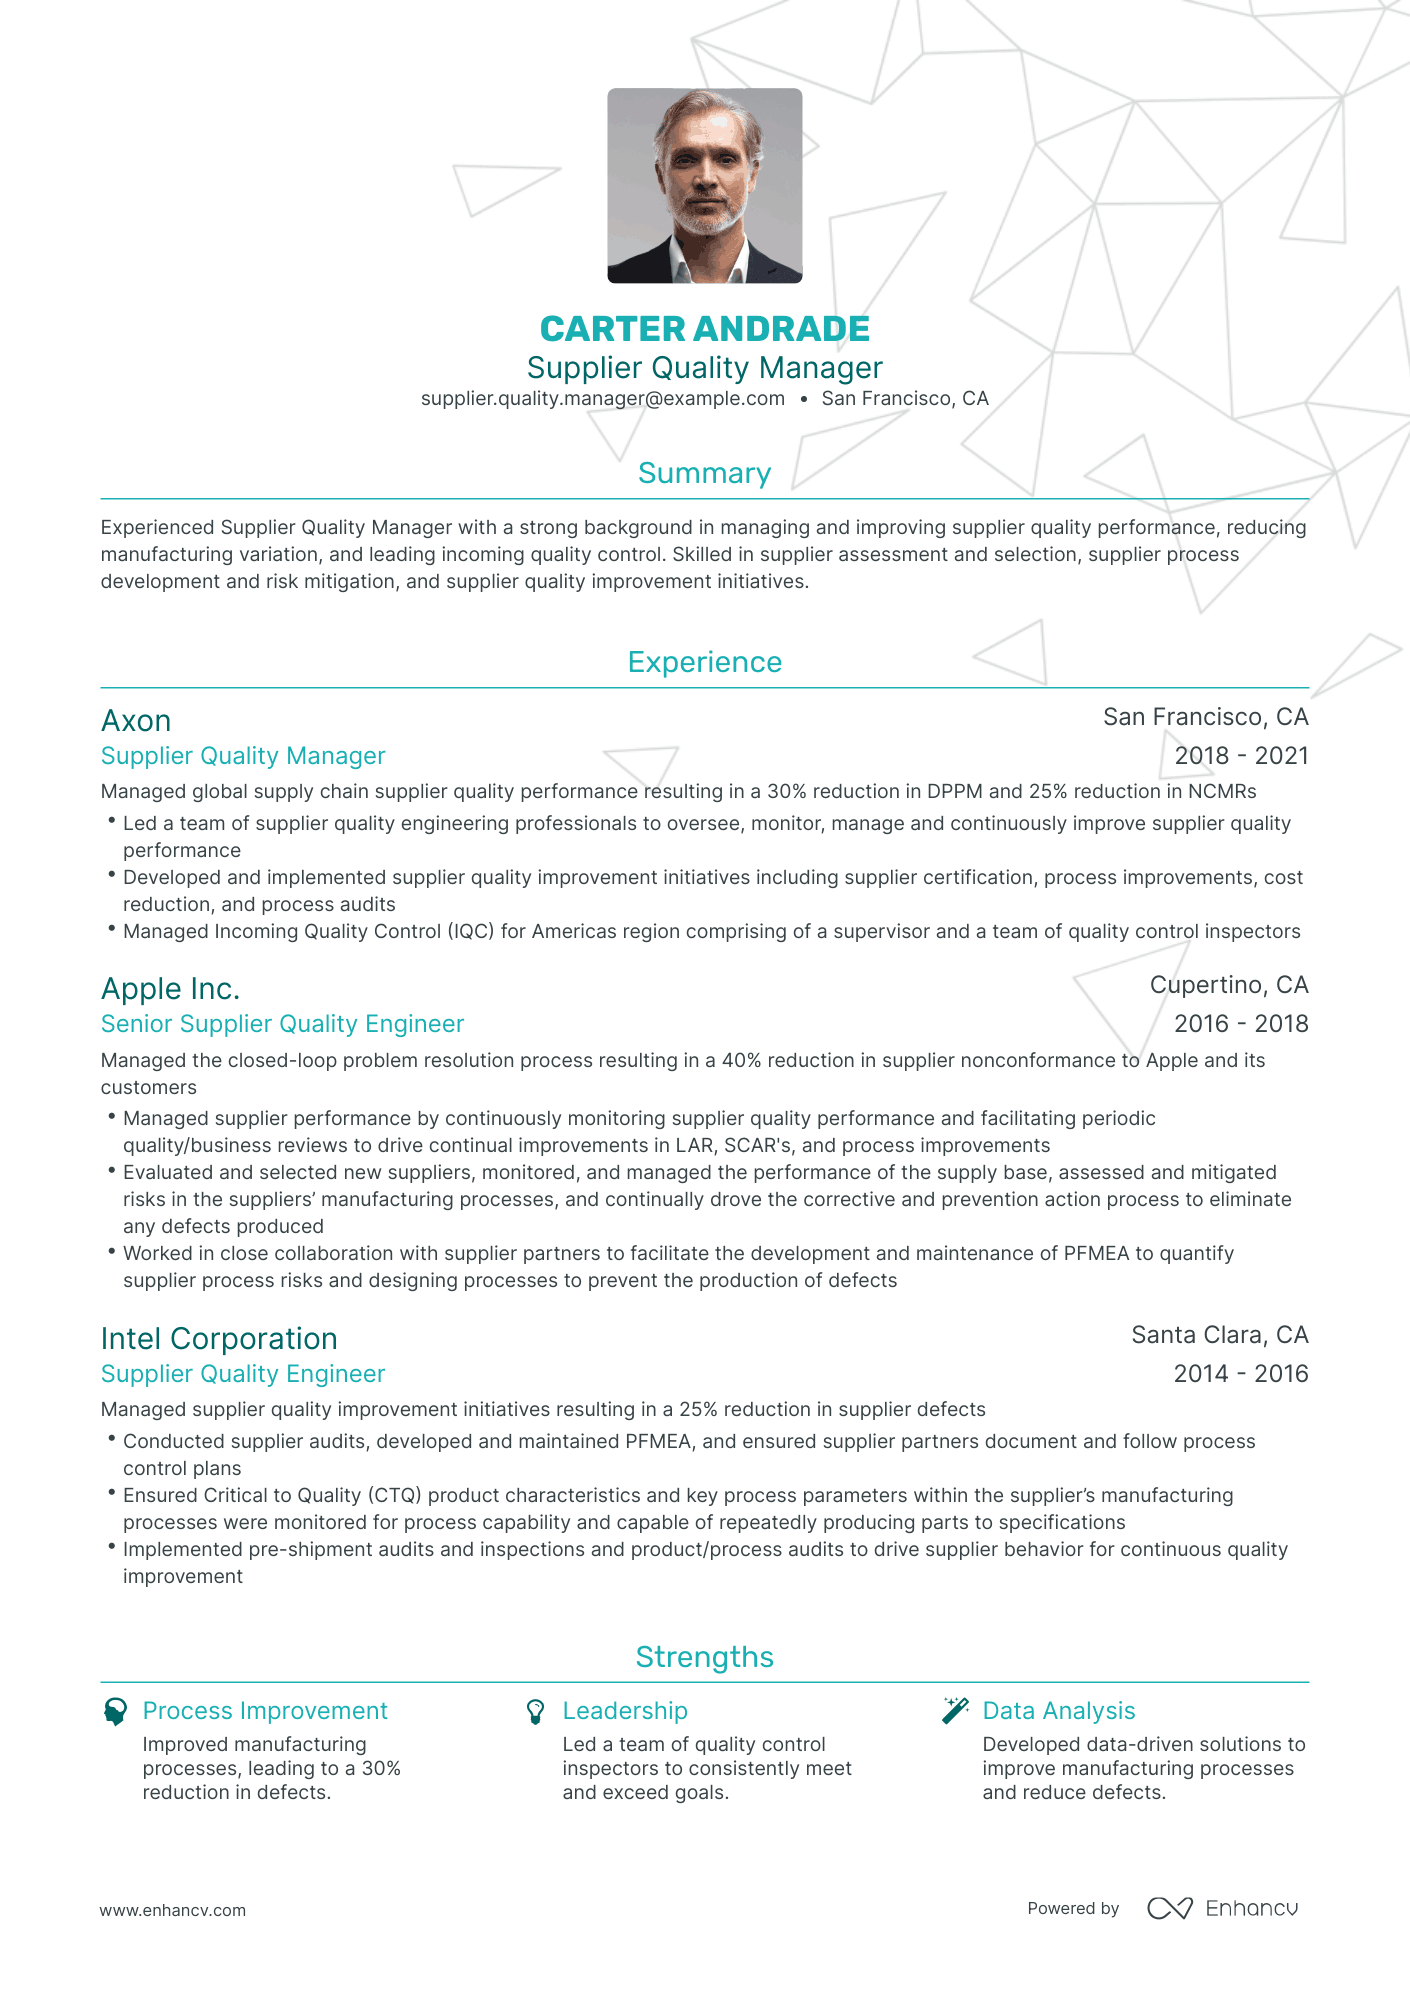 Traditional Supplier Quality Manager Resume Template